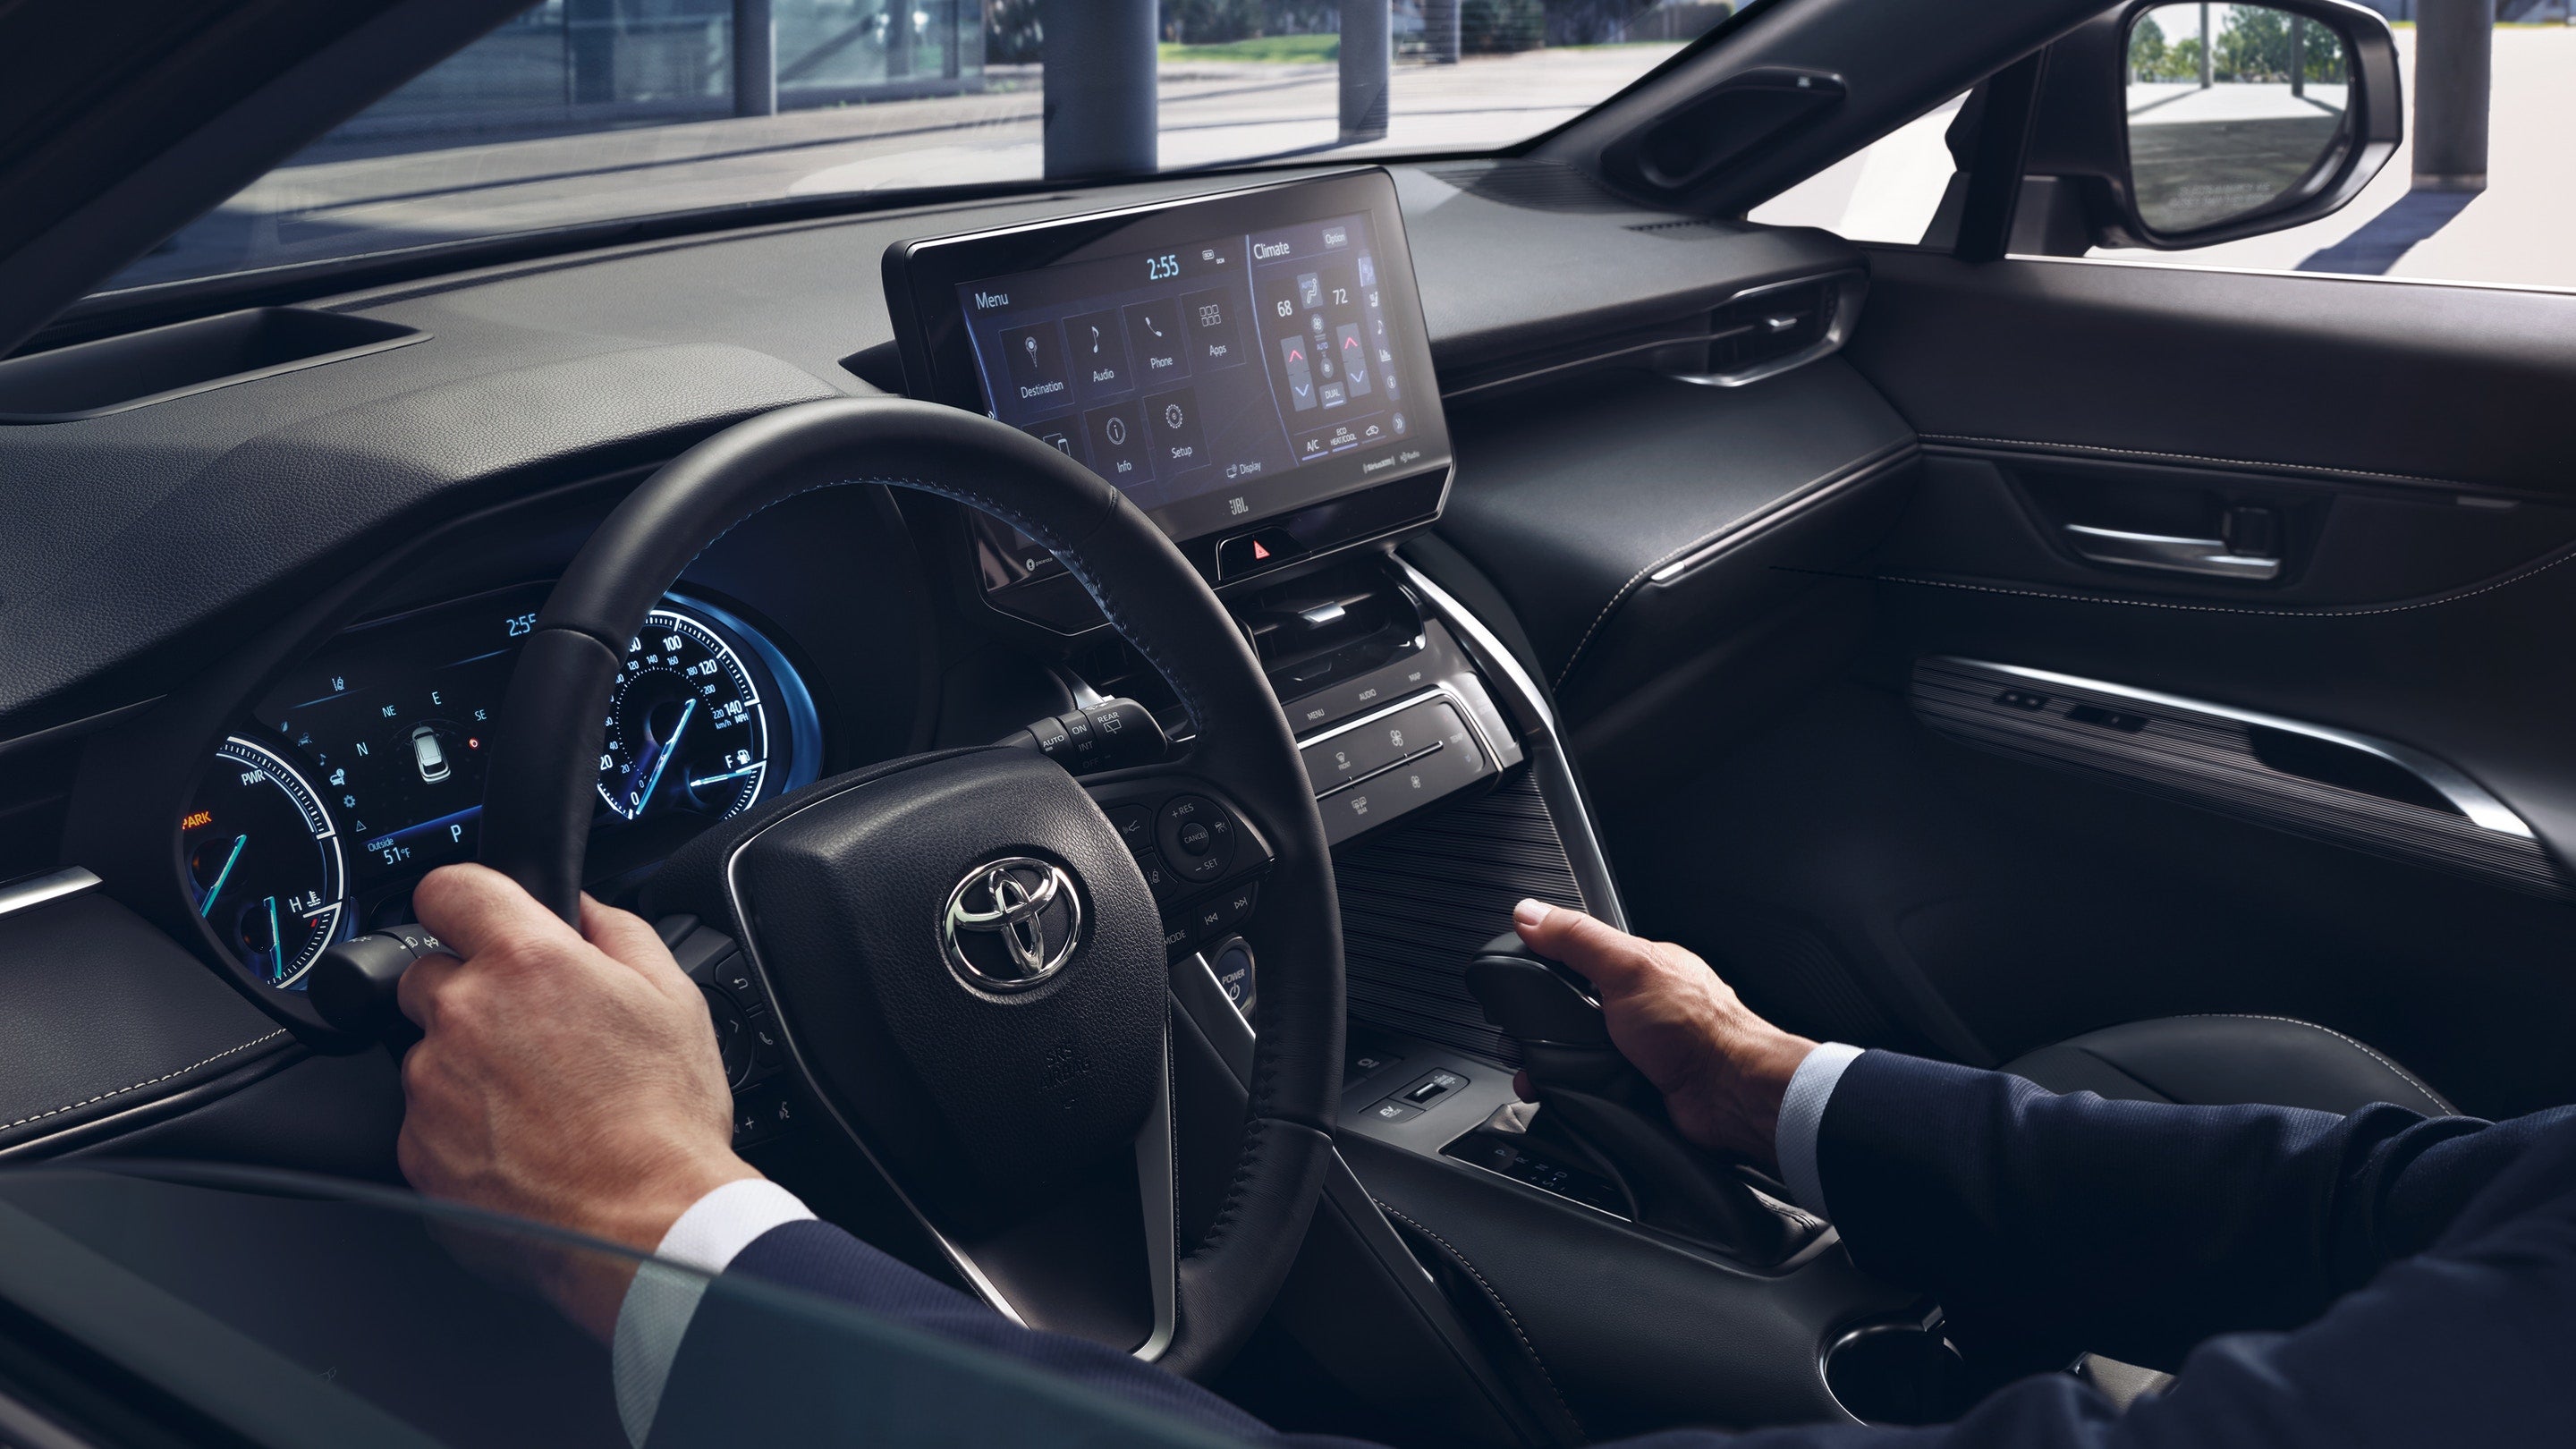 All New 2021 Toyota Venza Technology - Falmouth Toyota of Bourne, MA - Serving Cape Cod, Hyannis, Plymouth MA